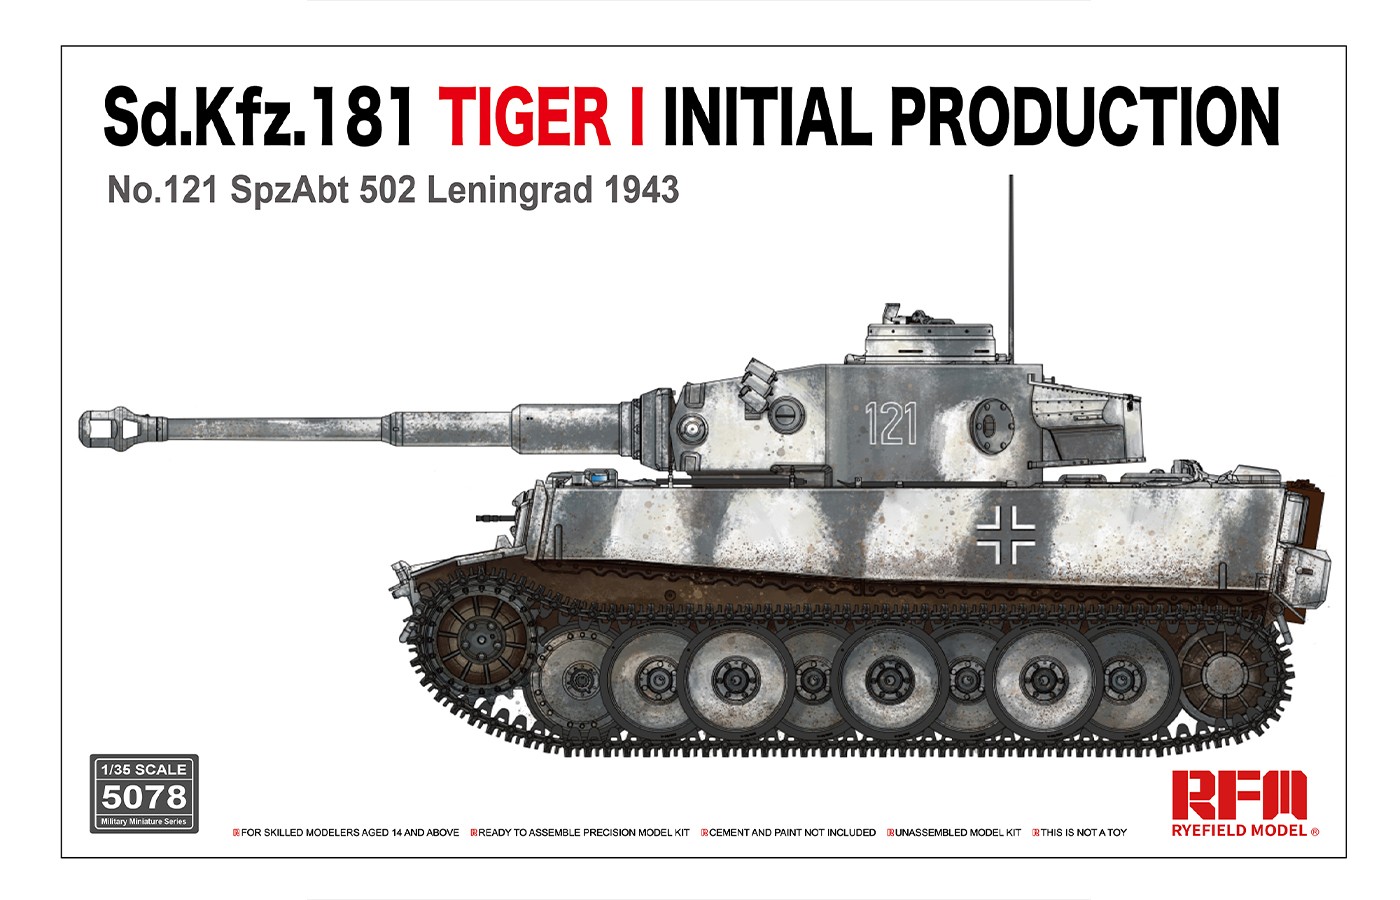 RM-5078 Sd.Kfz.181 Tiger I INITIAL PRODUCTION